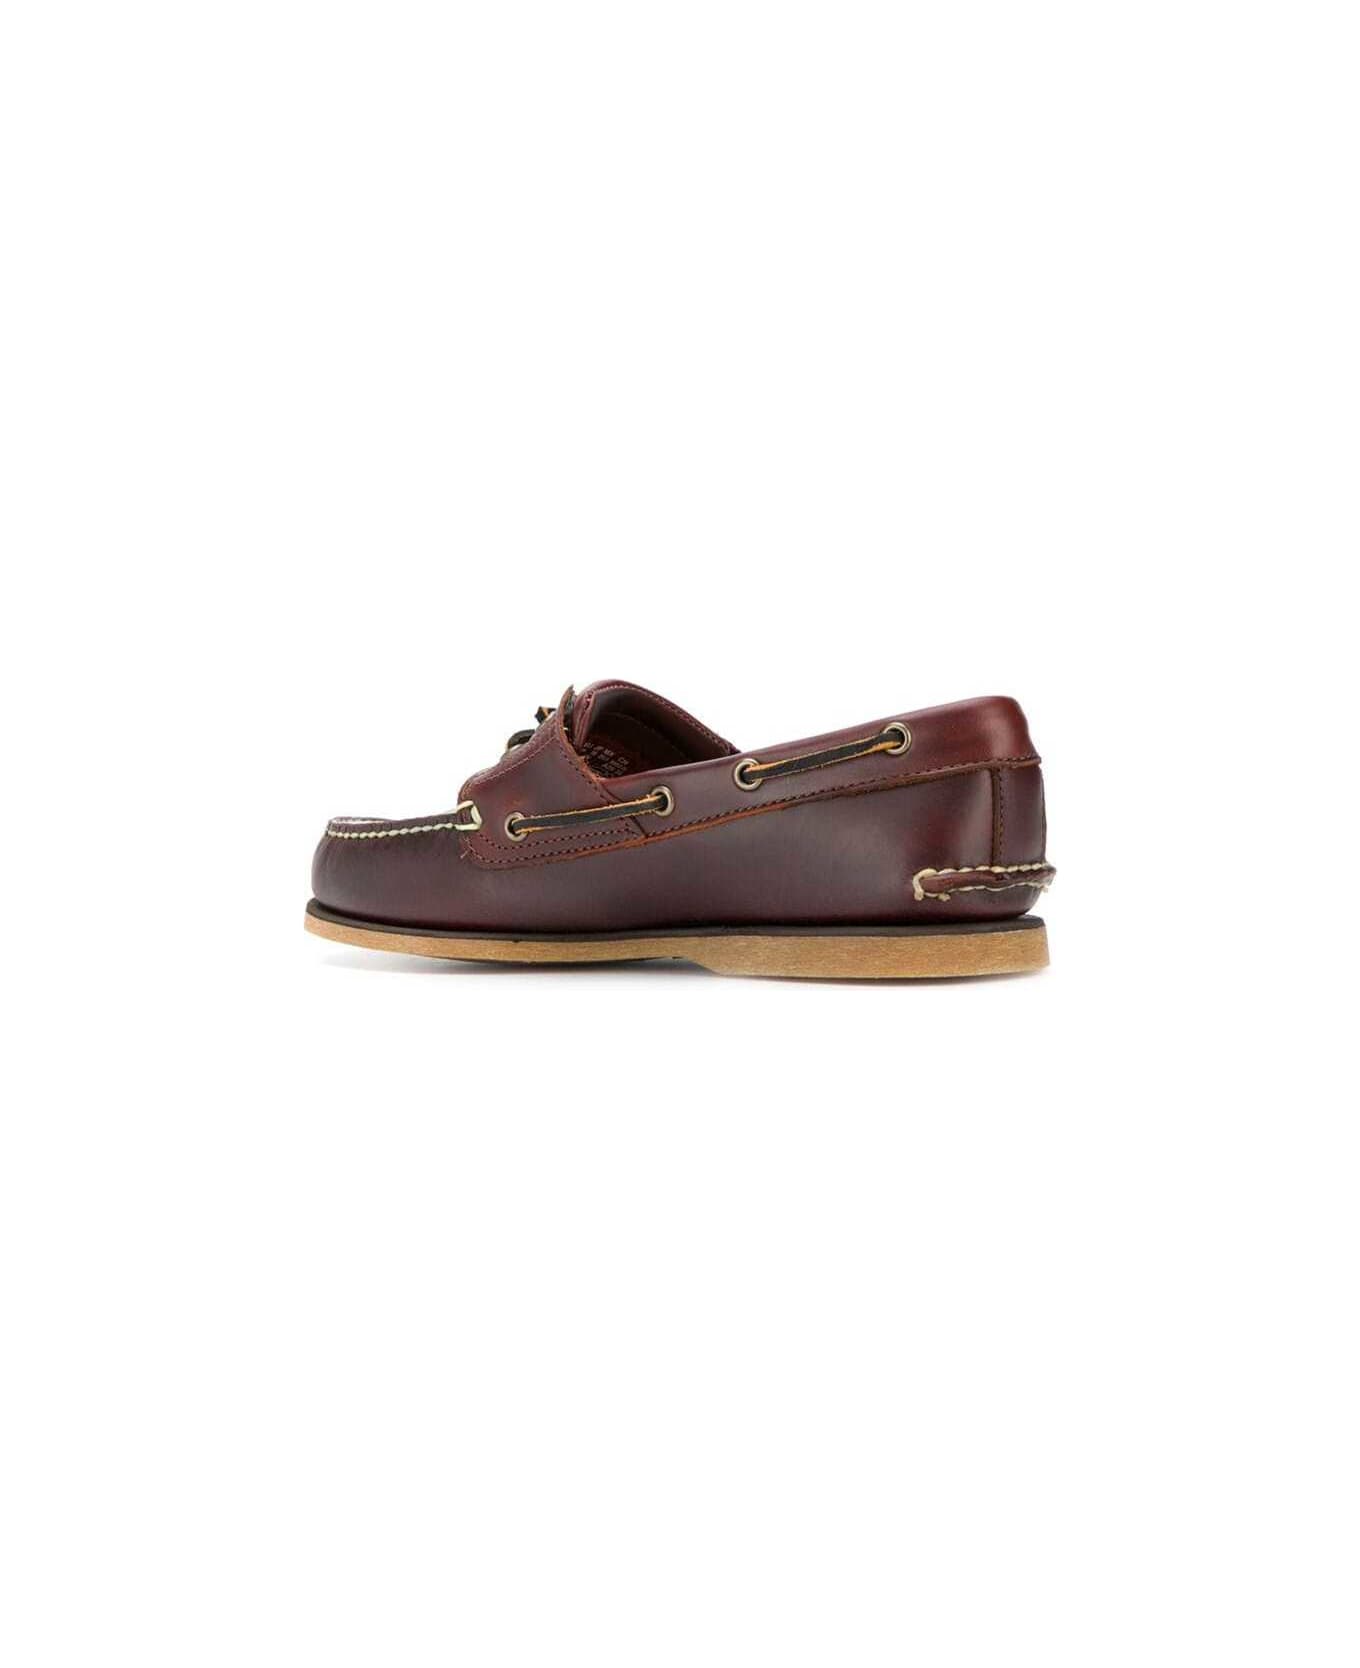 Timberland Classic Boat - Brown